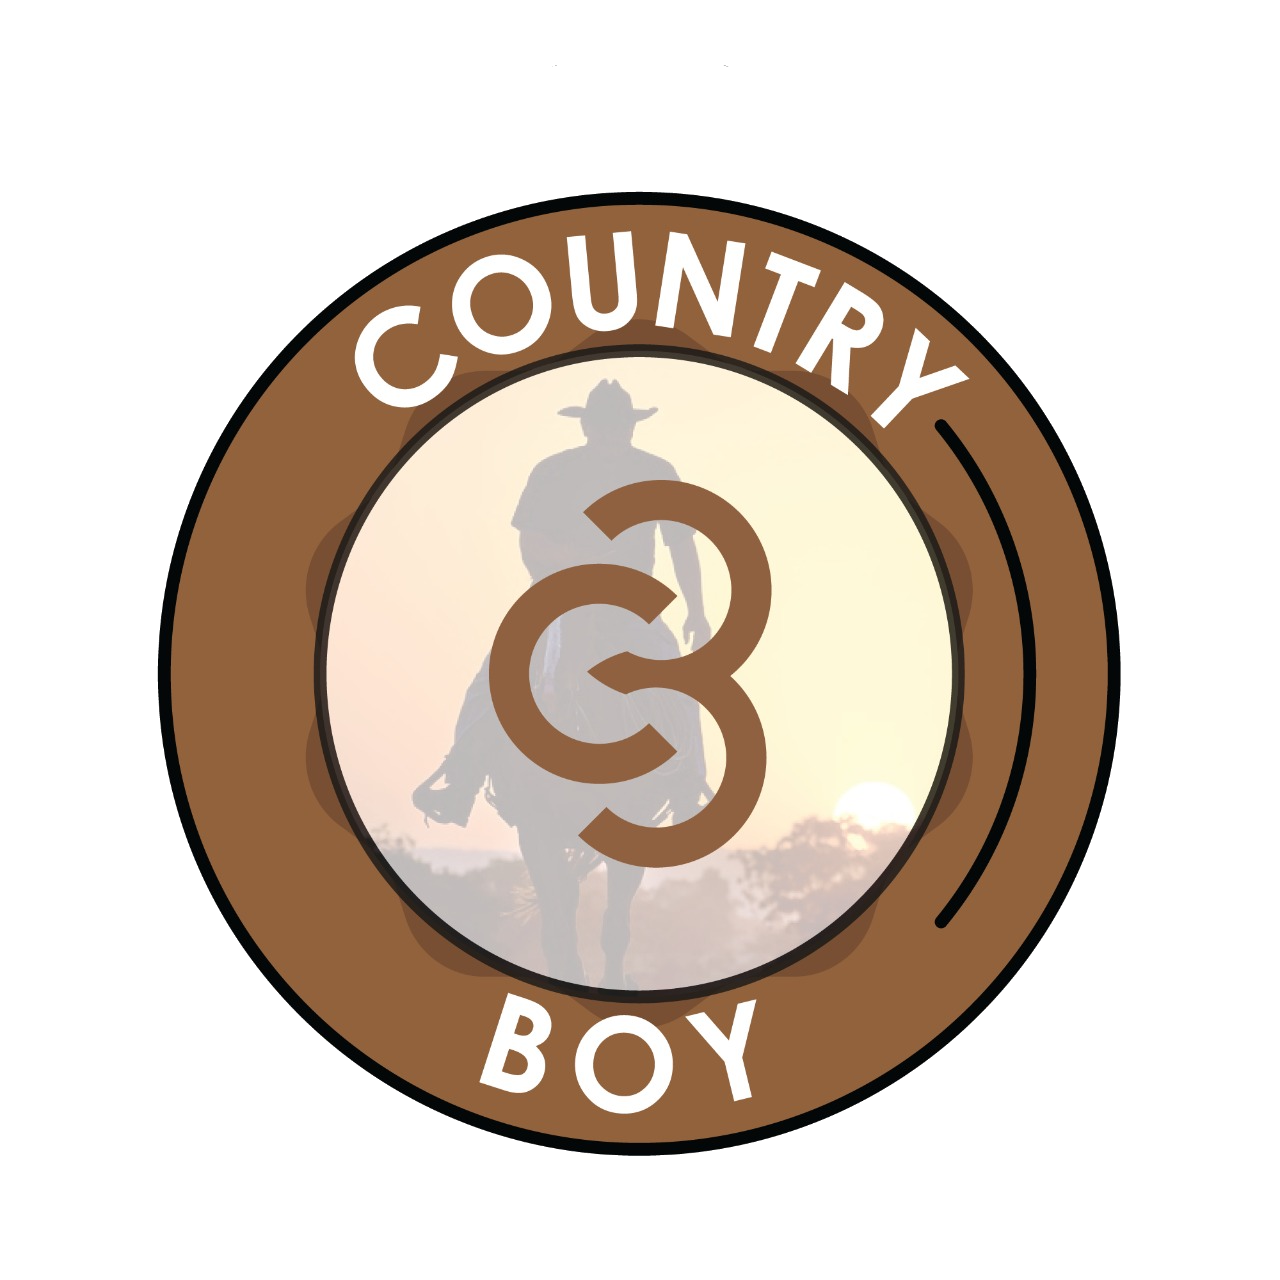 Countryboy by Farmers Impex